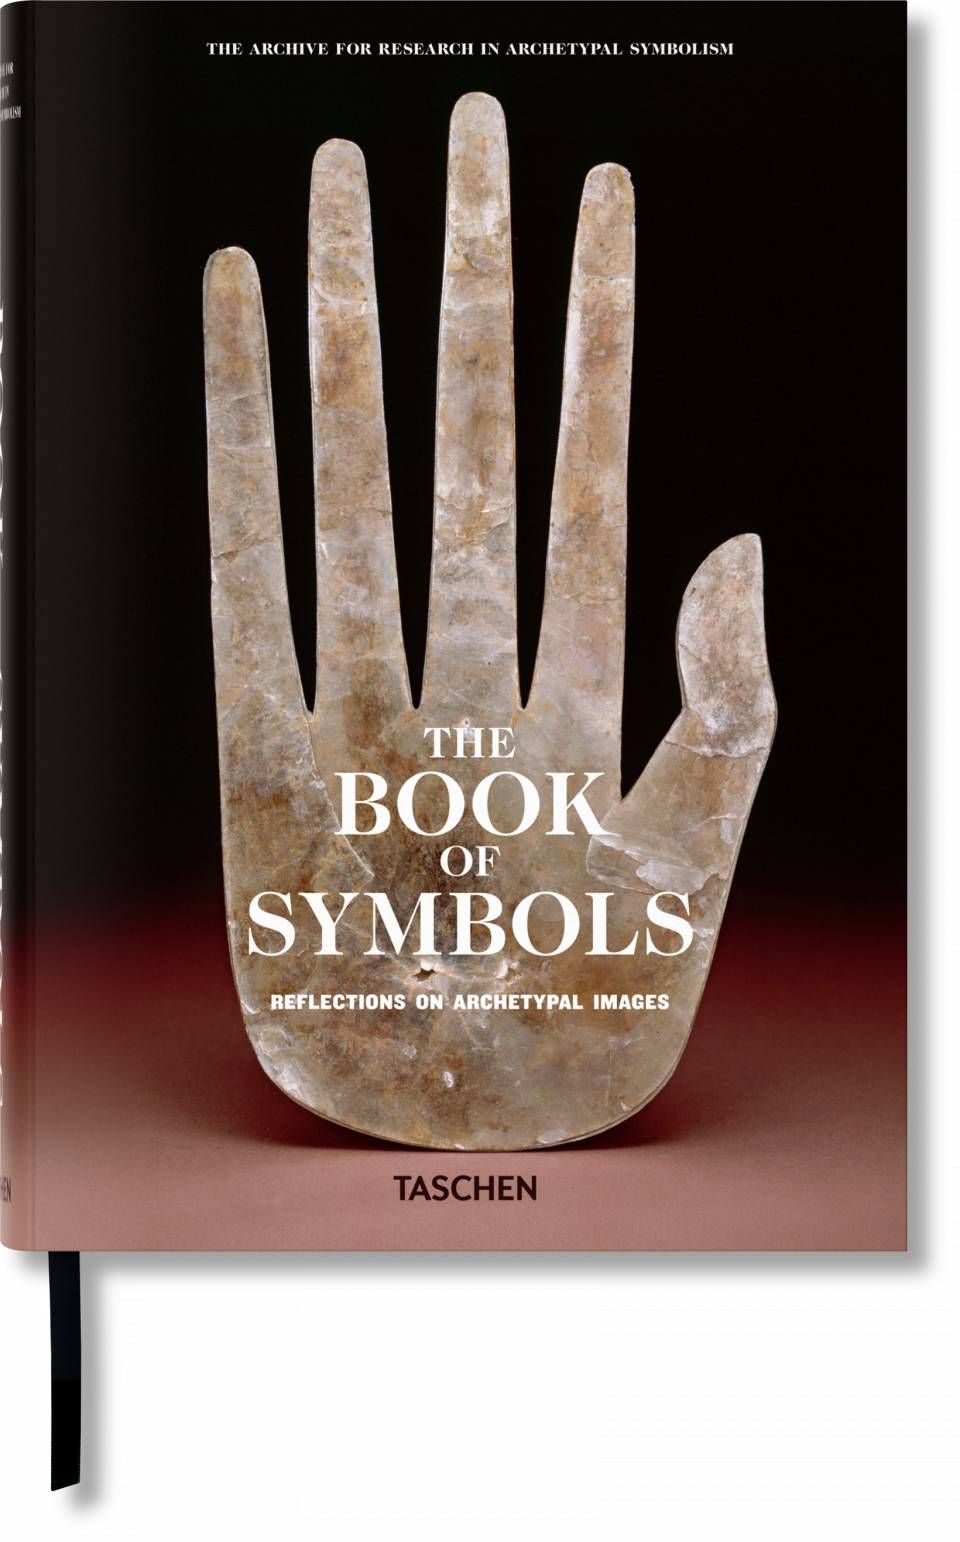 The Book of Symbols. Reflections on Archetypal Images | TASCHEN